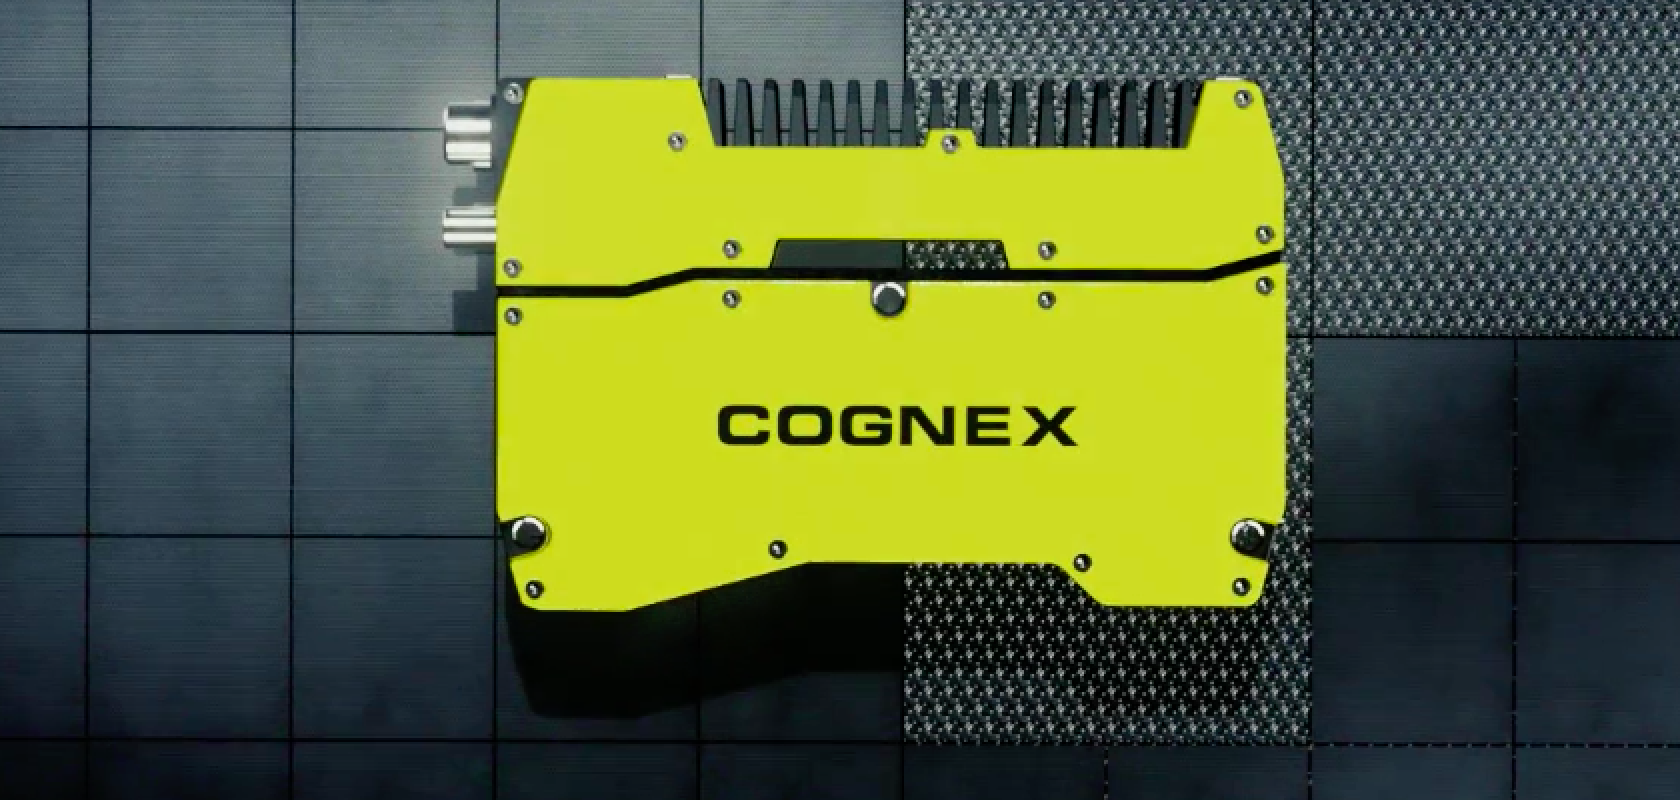 Cognex's says its new launch will be usable across a range of inspection and measurement applications. (Image: Cognex)